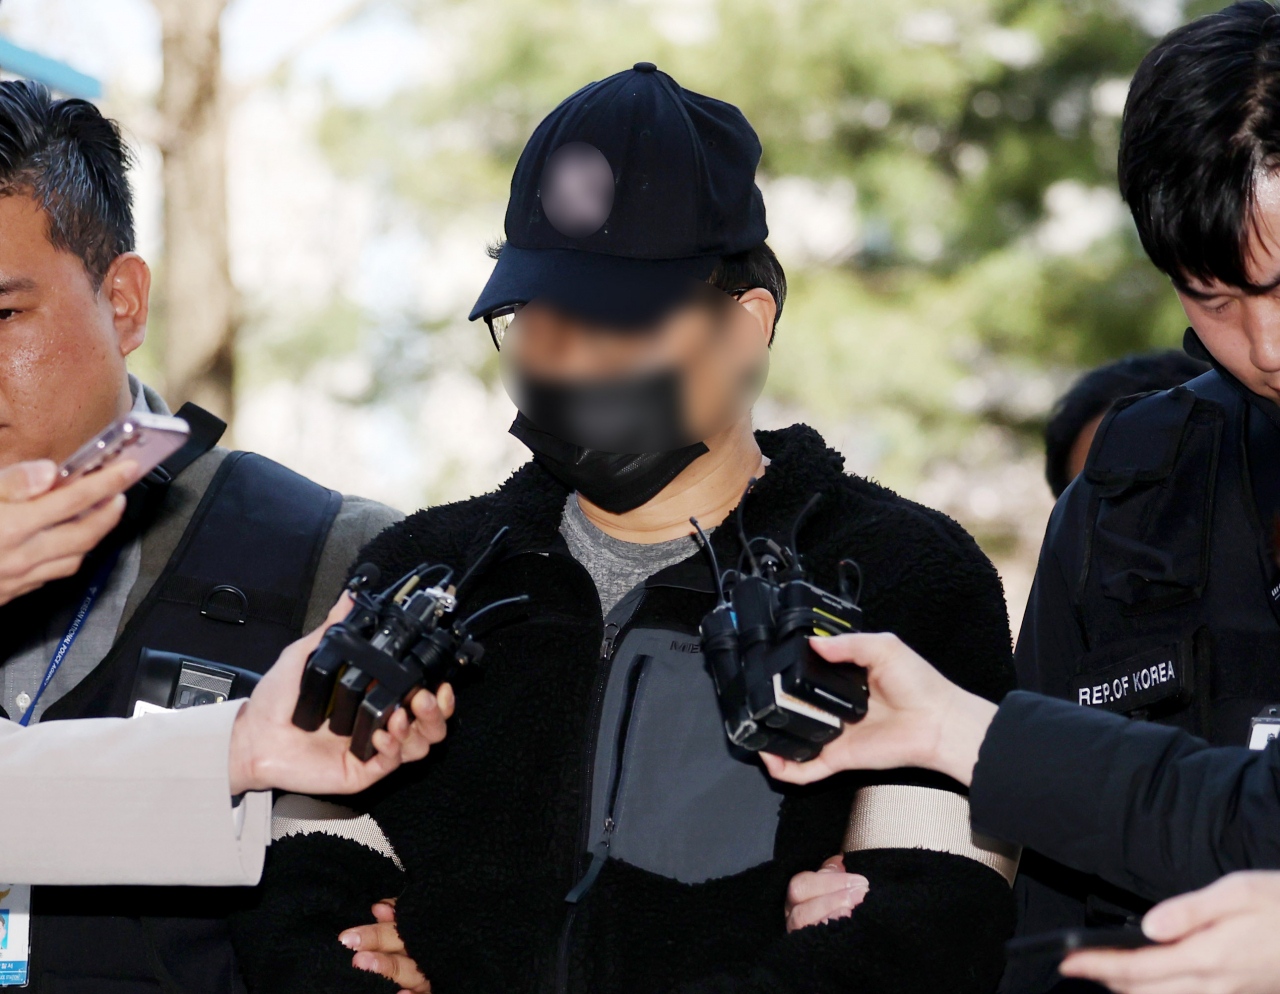 The suspect accused of installing illegal cameras at 41 polling stations nationwide is escorted by the police to attend a review of his arrest warrant at Incheon District Court on Sunday. (Yonhap)